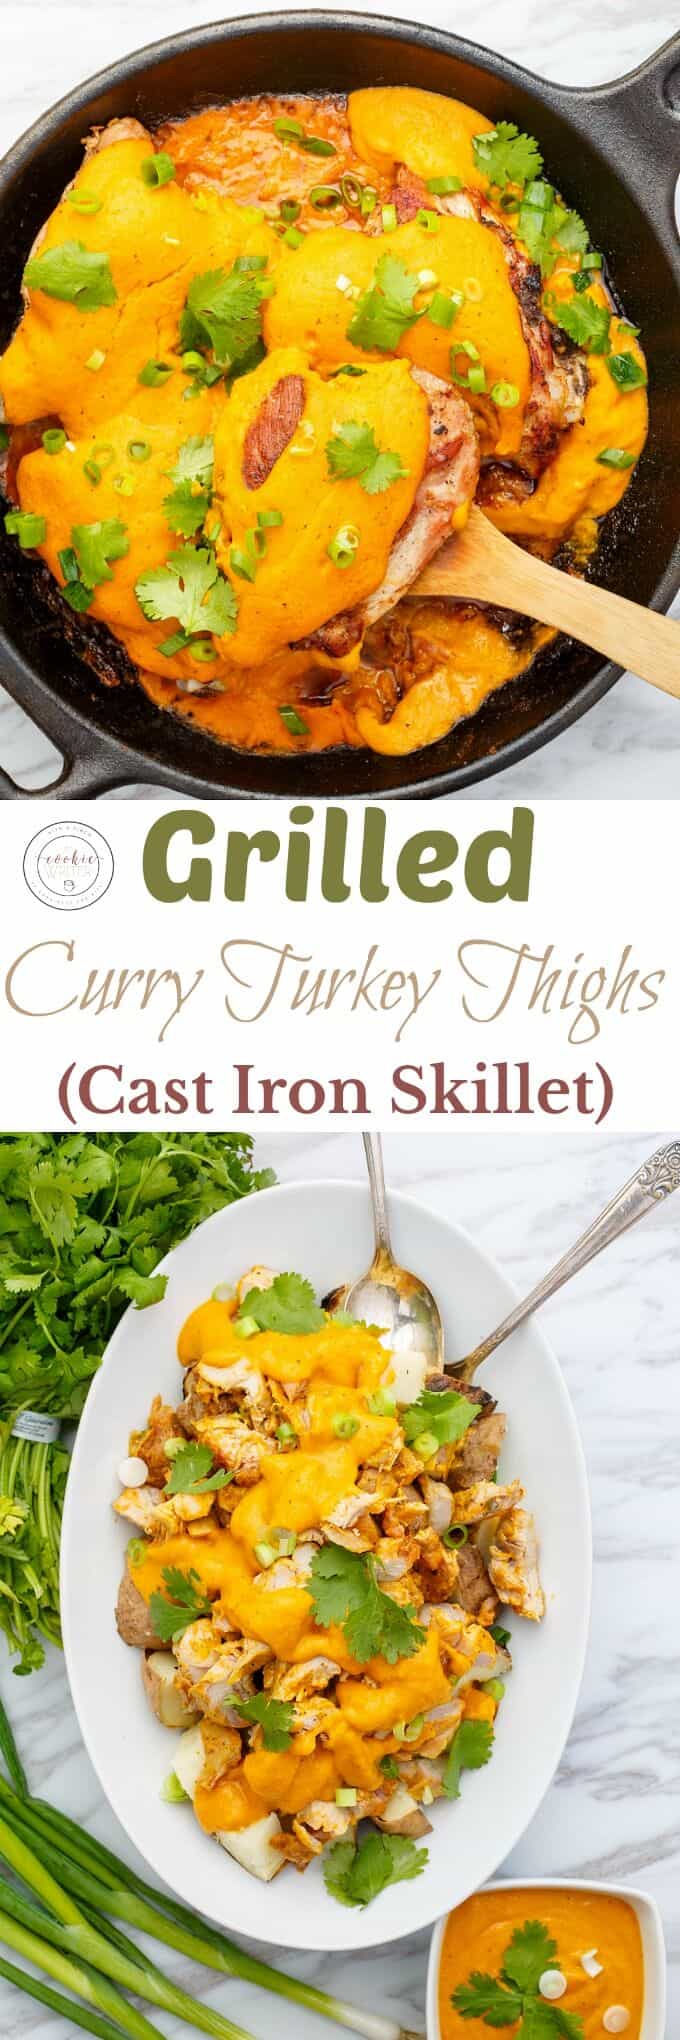 Grilled Curry Turkey Thighs (Cast Iron Skillet)